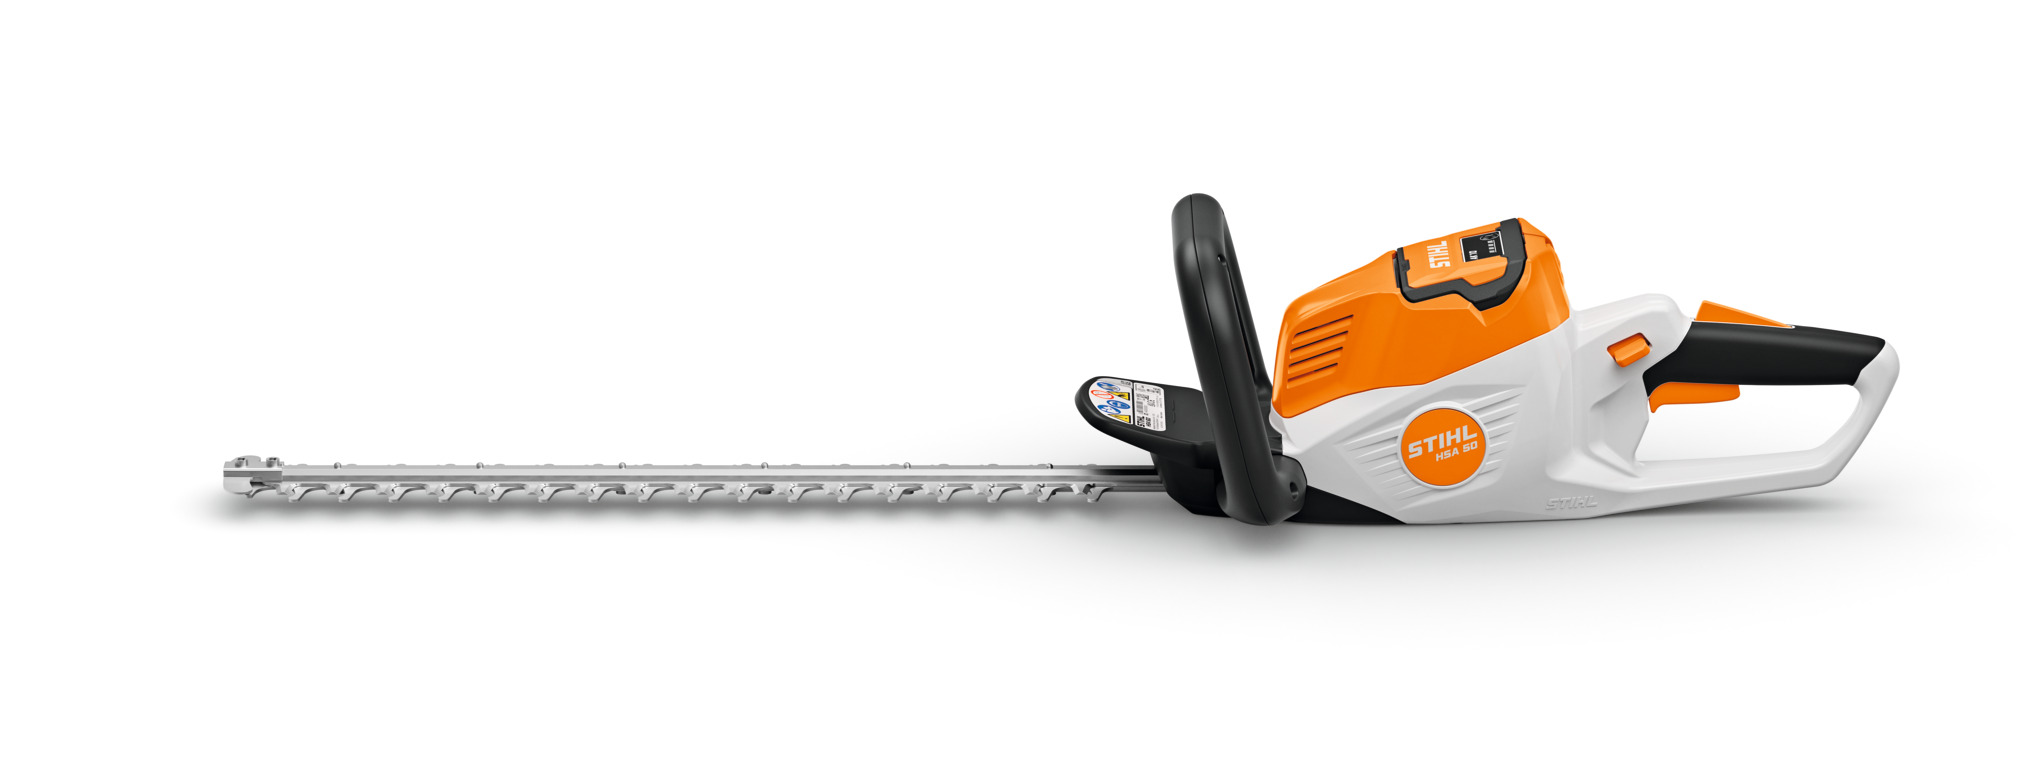 HSA 50 Hedge Trimmer